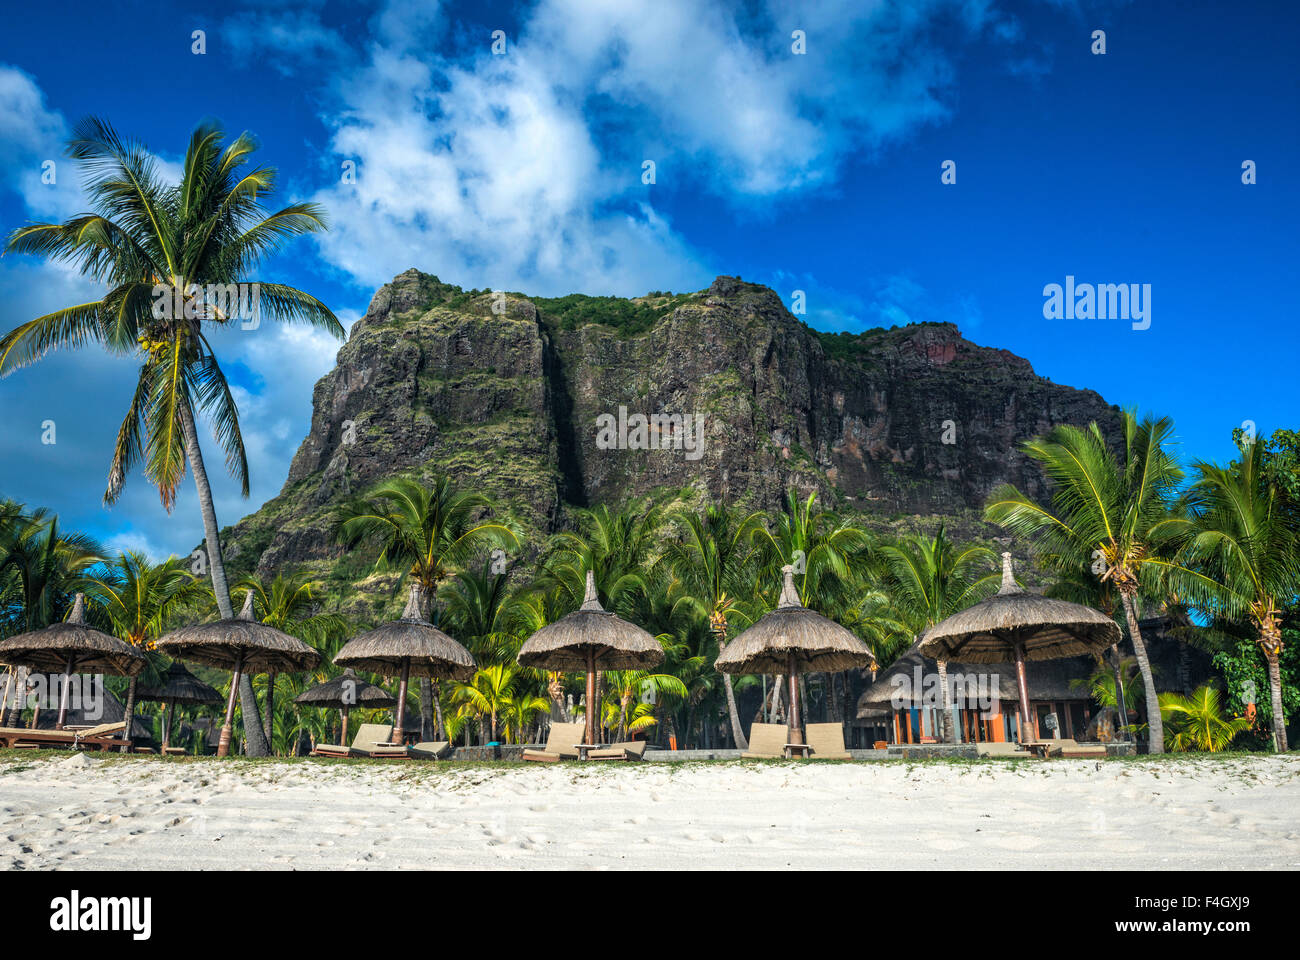 The Le Mont Brabant mountain in Mauritius rising behind palm trees on the sandy beach Stock Photo